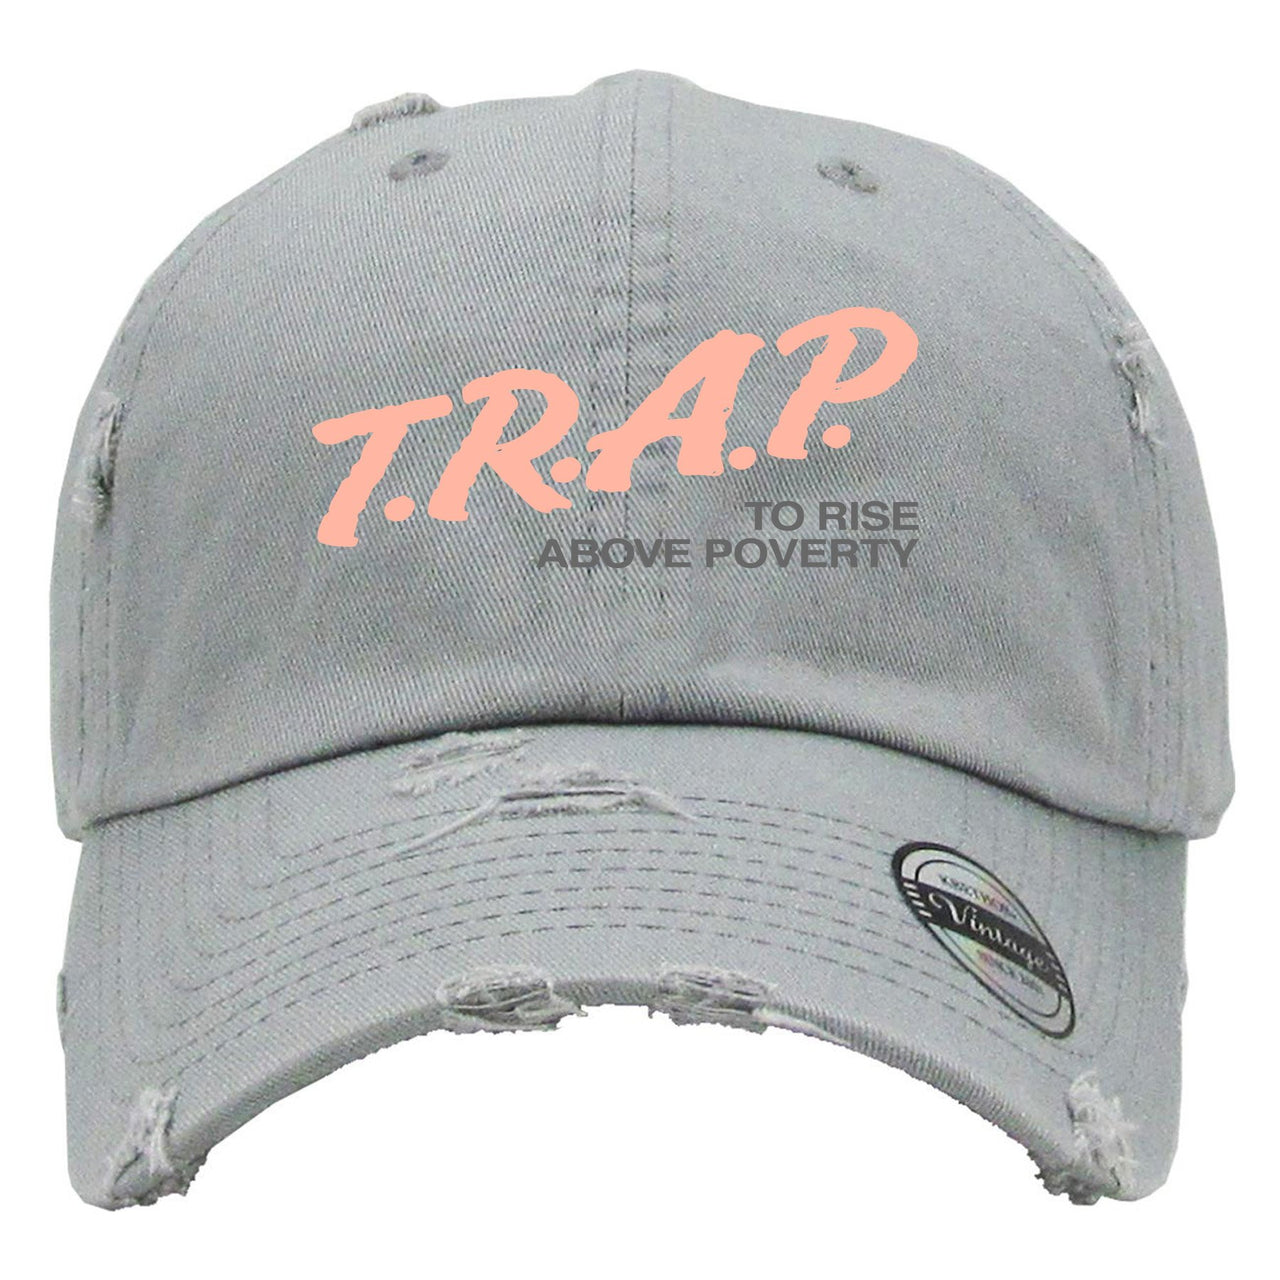 True Form v2 350s Distressed Dad Hat | Trap To Rise Above Poverty, Light Gray